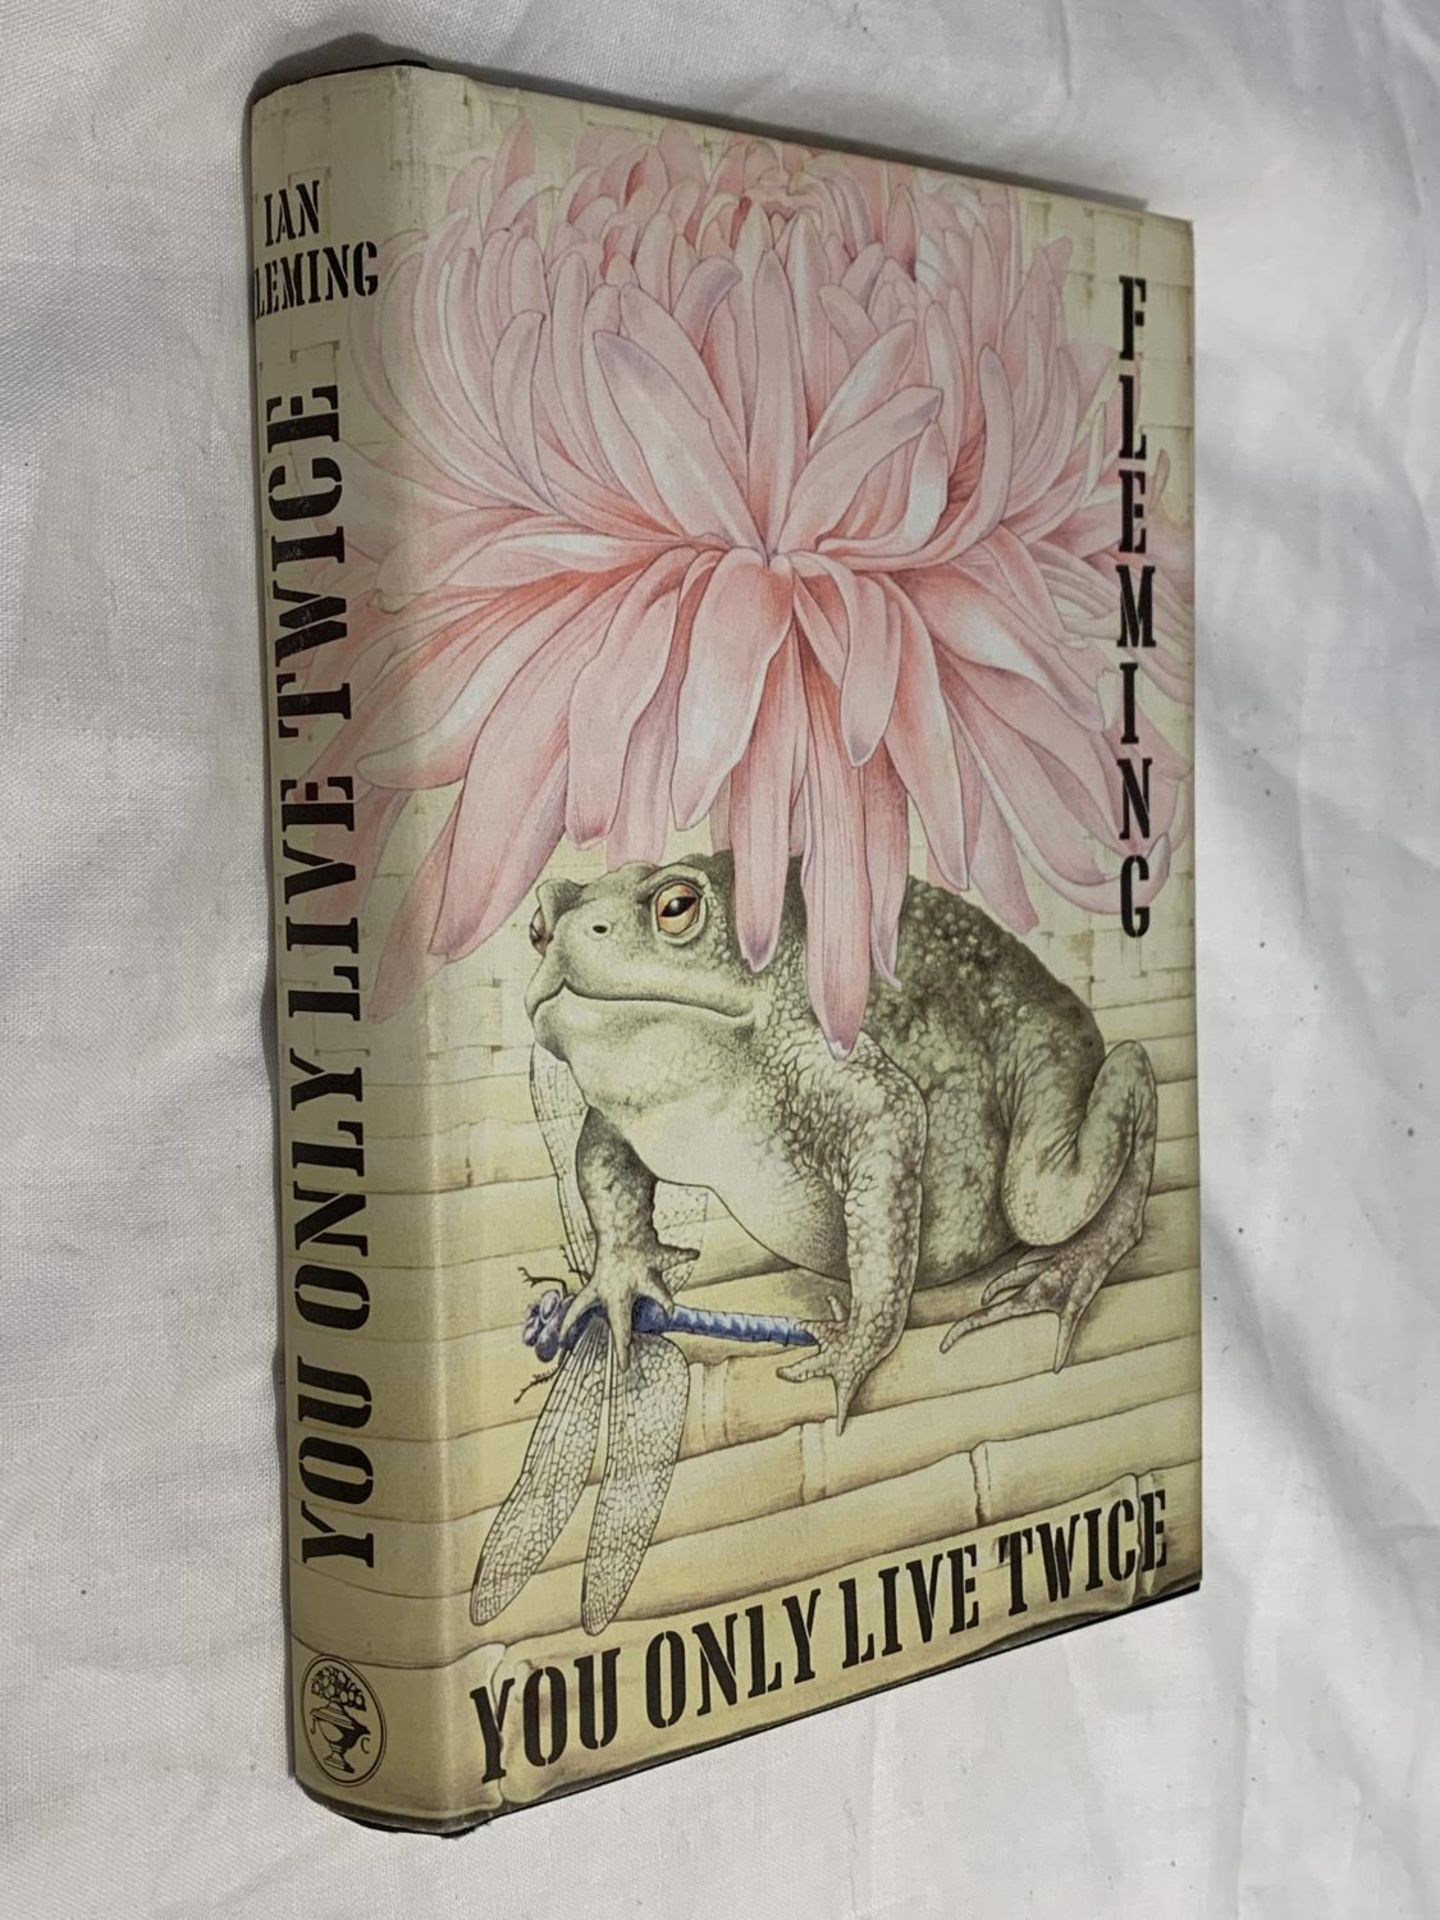 A HARDBACK FIRST EDITION - YOU ONLY LIVE TWICE BY IAN FLEMING, WITH DUST JACKET - PUBLISHED 1964. - Image 3 of 7